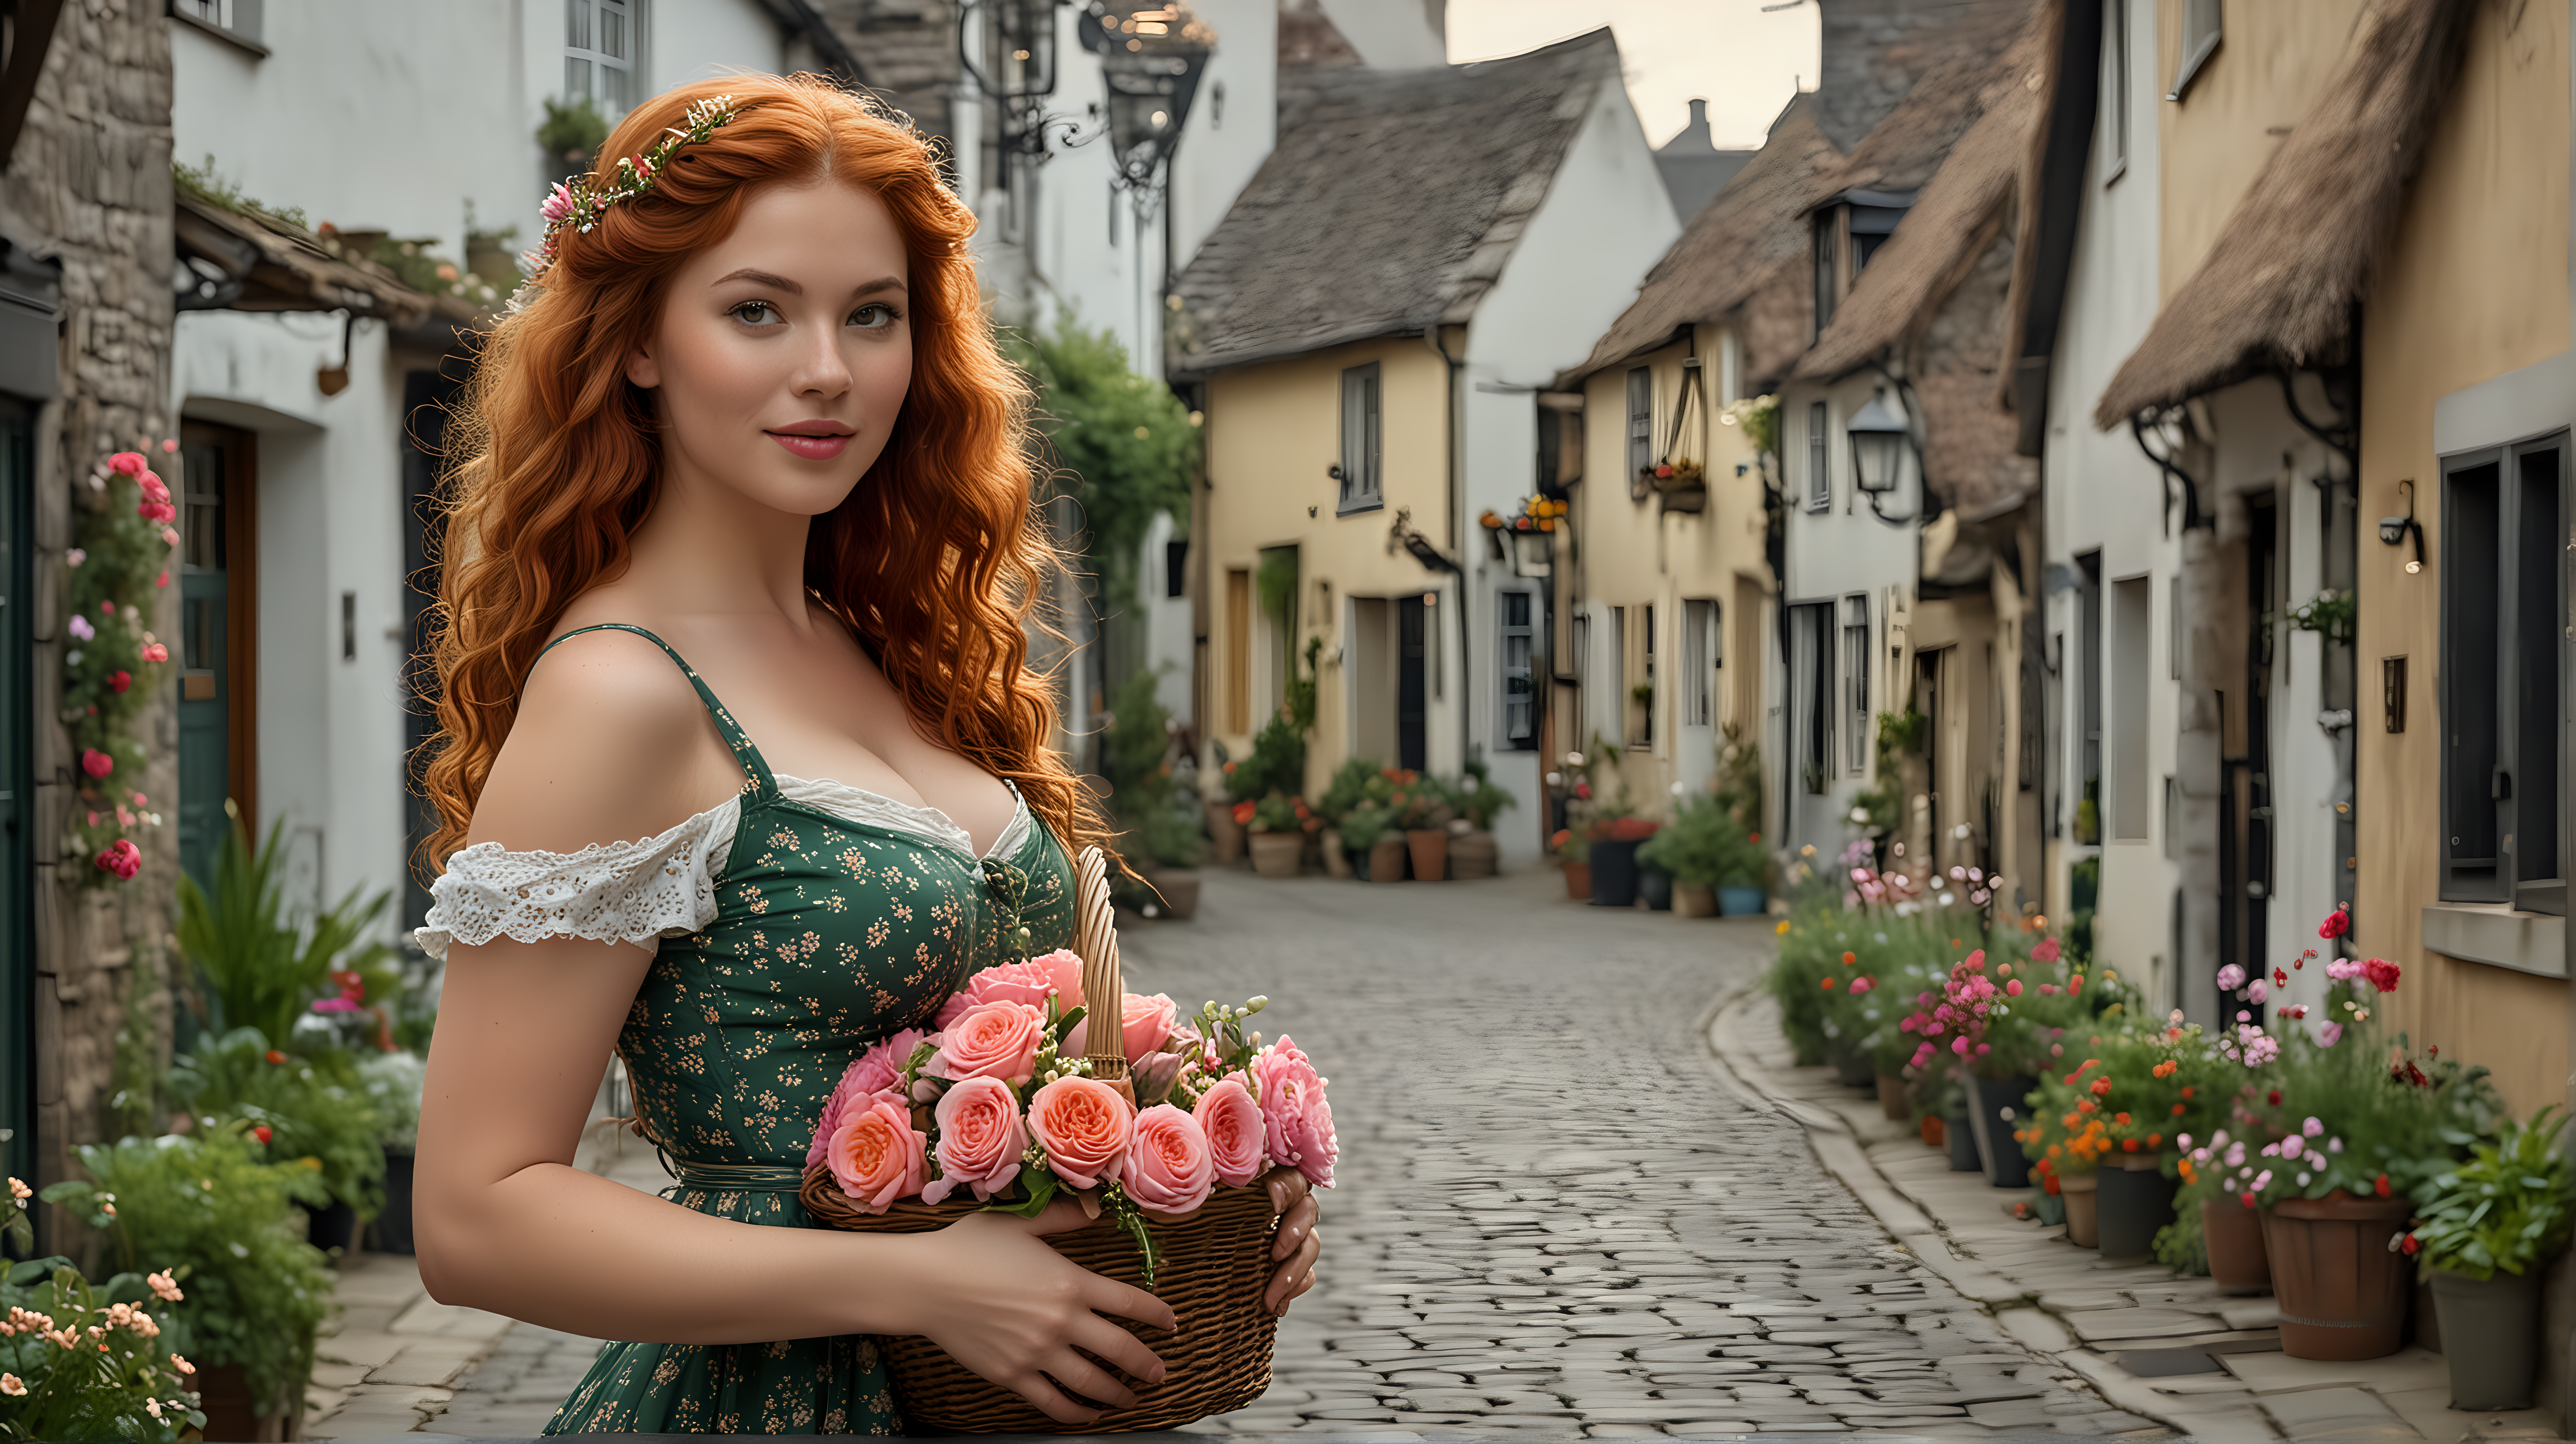 high-resolution full-length composition, photograph captures the enchanting essence of Merida from Brave, she's 40 years old, as she stands on a cobblestone street in a small village. Her very-long wavy red hair cascades around her shoulders, framing her features with a touch of natural elegance.

She wears a Women's green Floral Printed Spaghetti Strap Dress that accentuates her very large breasts and reveals a generous amount of cleavage, it also emphasizes her shapely legs. Her makeup is applied with a skilled hand, featuring heavy eyeliner and pink lipstick that enhances her flirty smile.  She has freckles across her cheeks and nose. white shoes, she's carrying a wicker basket full of flowers

Against the backdrop of the bustling village square, a flower shop bursts with vibrant color, its windows adorned with bouquets of fresh blooms in a multitude of hues. Pots of lively flowers line the sidewalk, infusing the scene with a sense of natural beauty and charm.

The photograph captures the vivid colors of the scene with clean, sharp focus, drawing attention to the woman's cute smile, thin waist, and wide hips. Every detail is meticulously rendered, from the ultra-detailed lighting to the subtle imperfections that lend authenticity to the image.

With a blend of studio and natural lighting, high contrast, and ray tracing techniques, the photograph achieves a level of realism that brings the scene to life. Random details, such as the texture of the woman's skin and the pores that dot its surface, add depth and dimension to the image, creating a captivating portrait of beauty and grace amidst the quaint charm of the Irish village. dark vignette around the photo